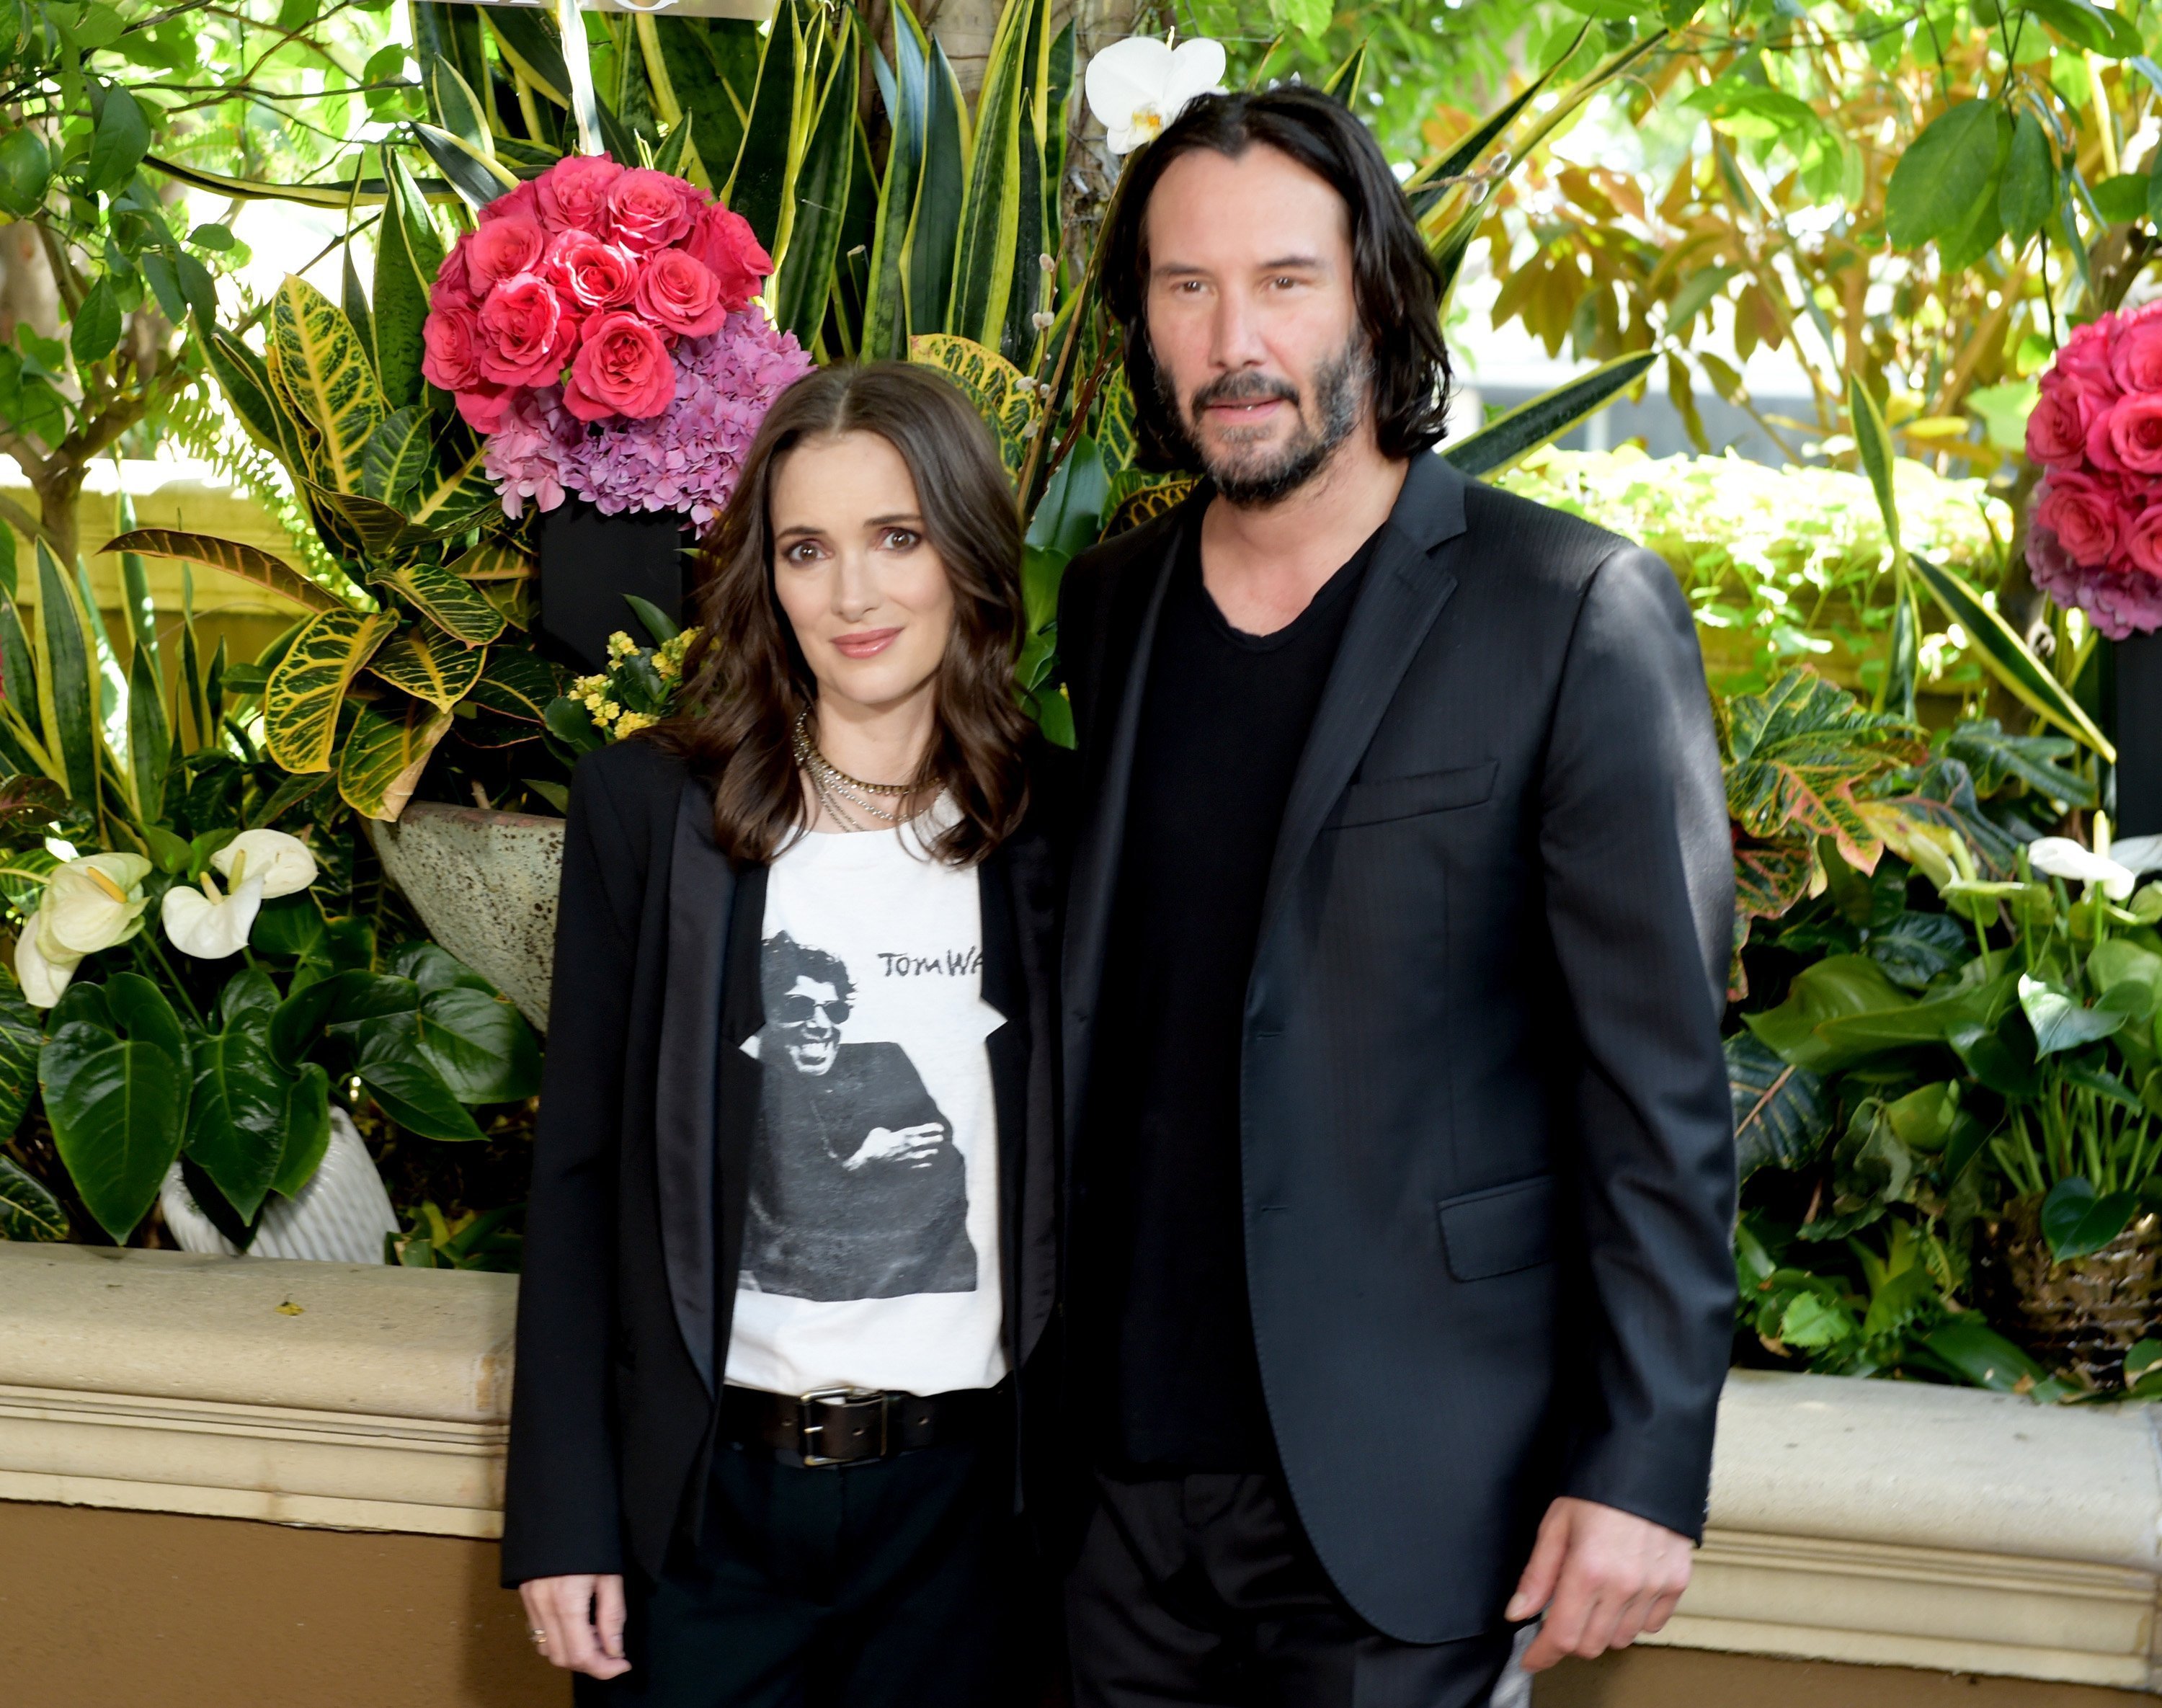 Winona Ryder (L) and Keanu Reeves attend a photo call for Regatta's "Destination Wedding" at the Four Seasons Hotel Los Angeles at Beverly Hills on August 18, 2018, in Los Angeles, California. | Source: Getty Images.